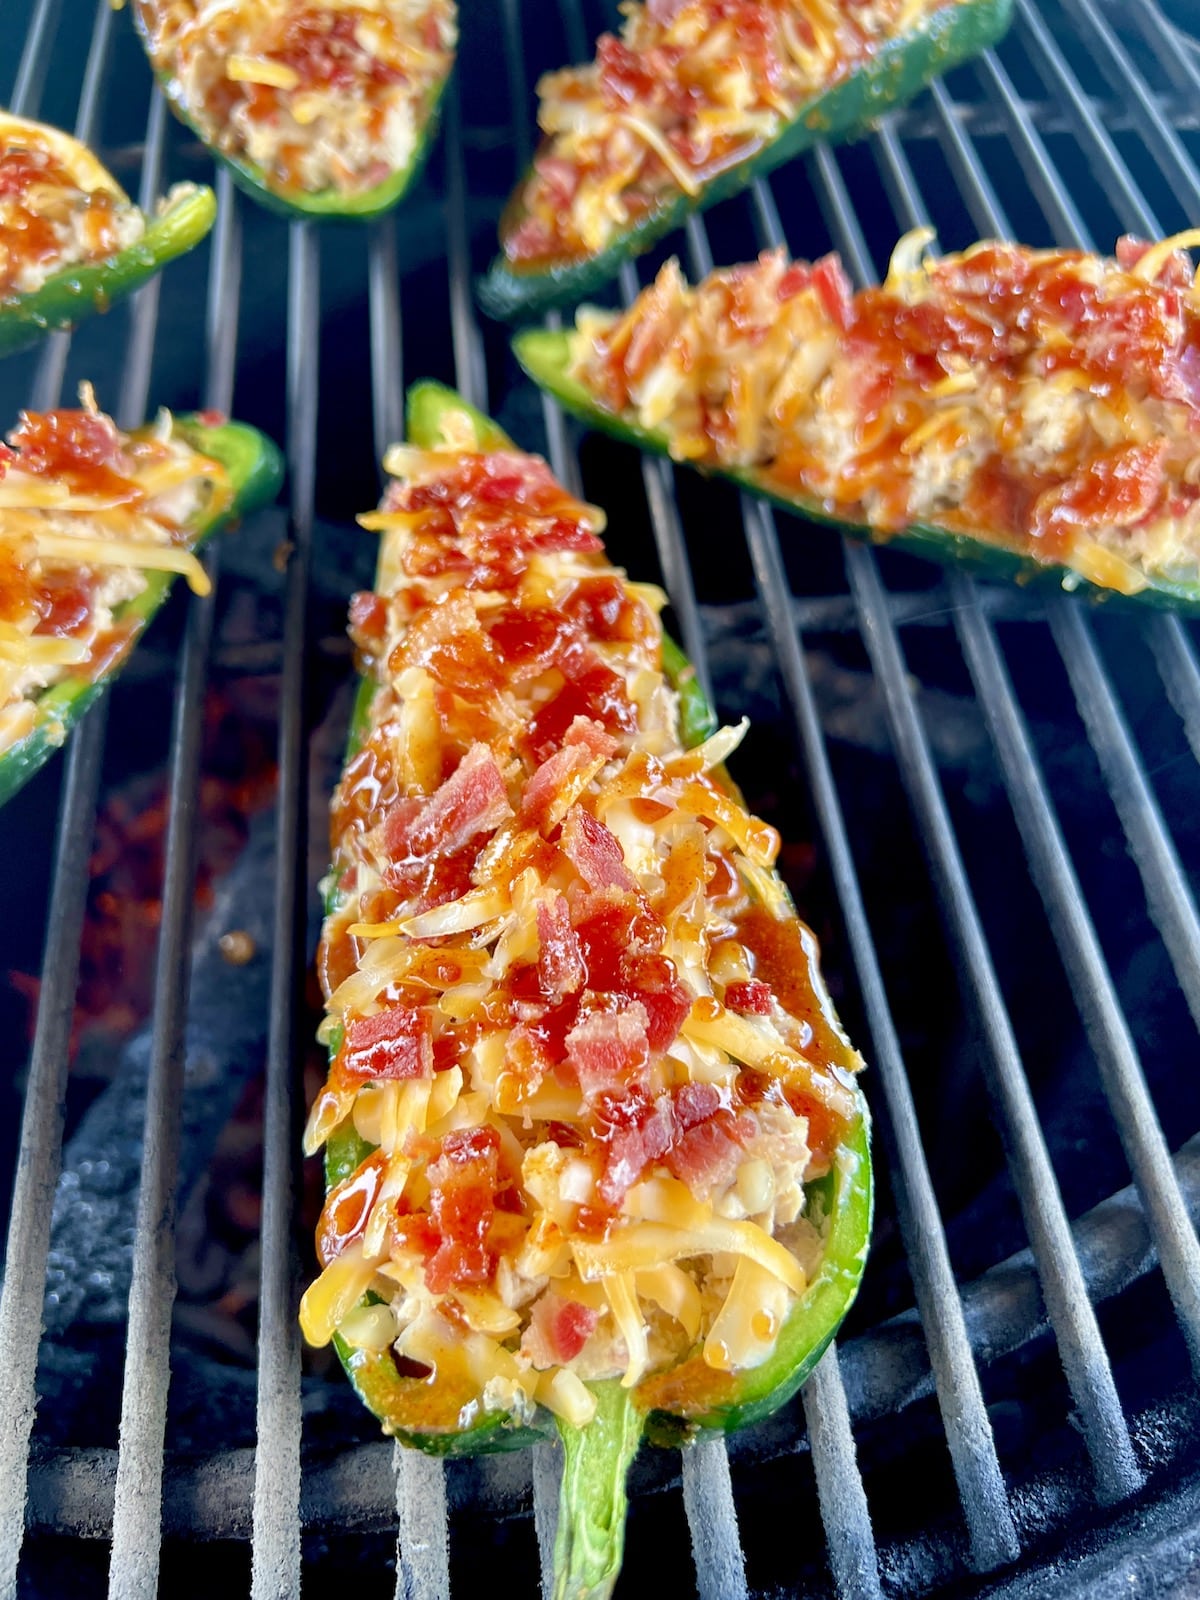 Grilling chicken stuffed peppers.